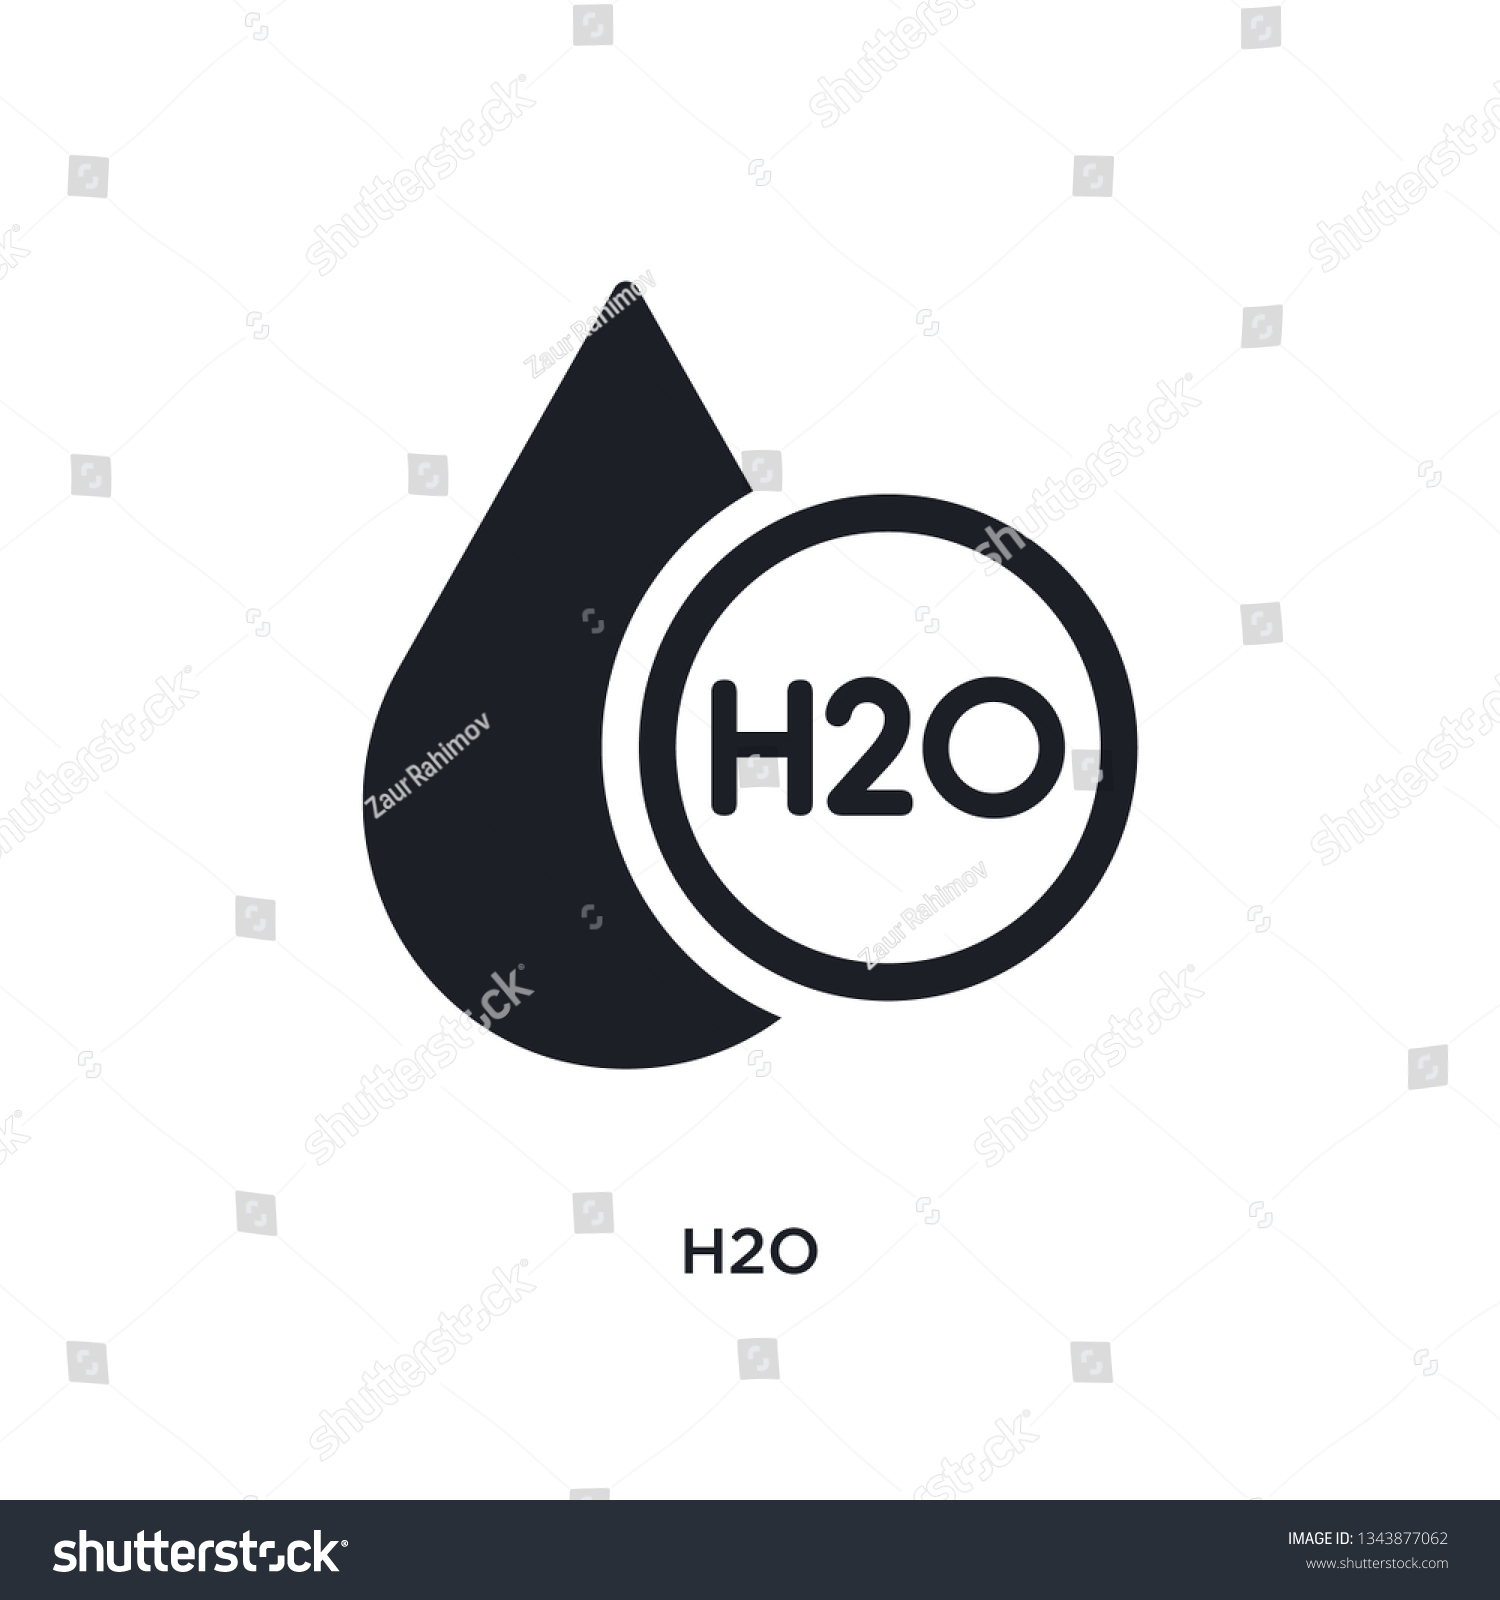 h2o isolated icon. simple element illustration from science concept icons. h2o editable logo sign symbol design on white background. can be use for web and mobile #1343877062